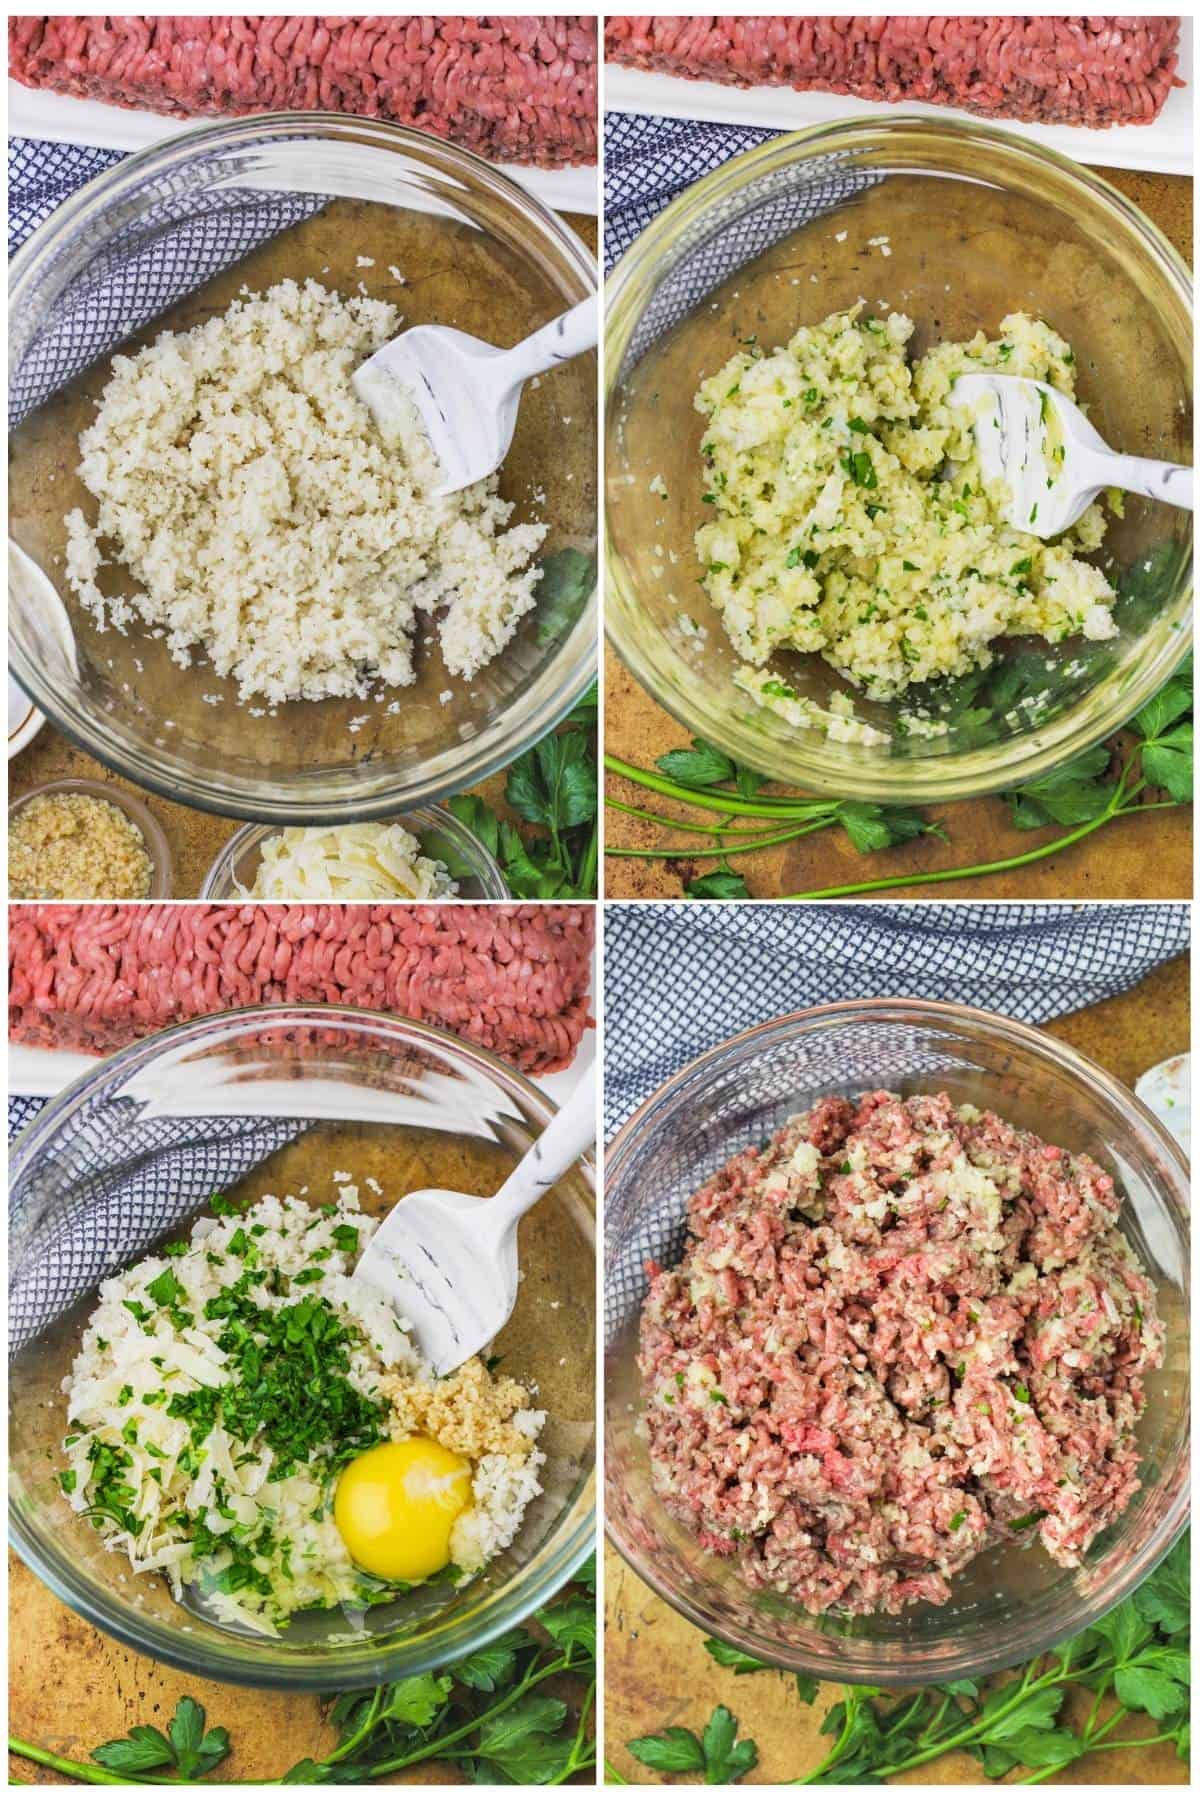 process of adding ingredients together to make Smoked Meatballs